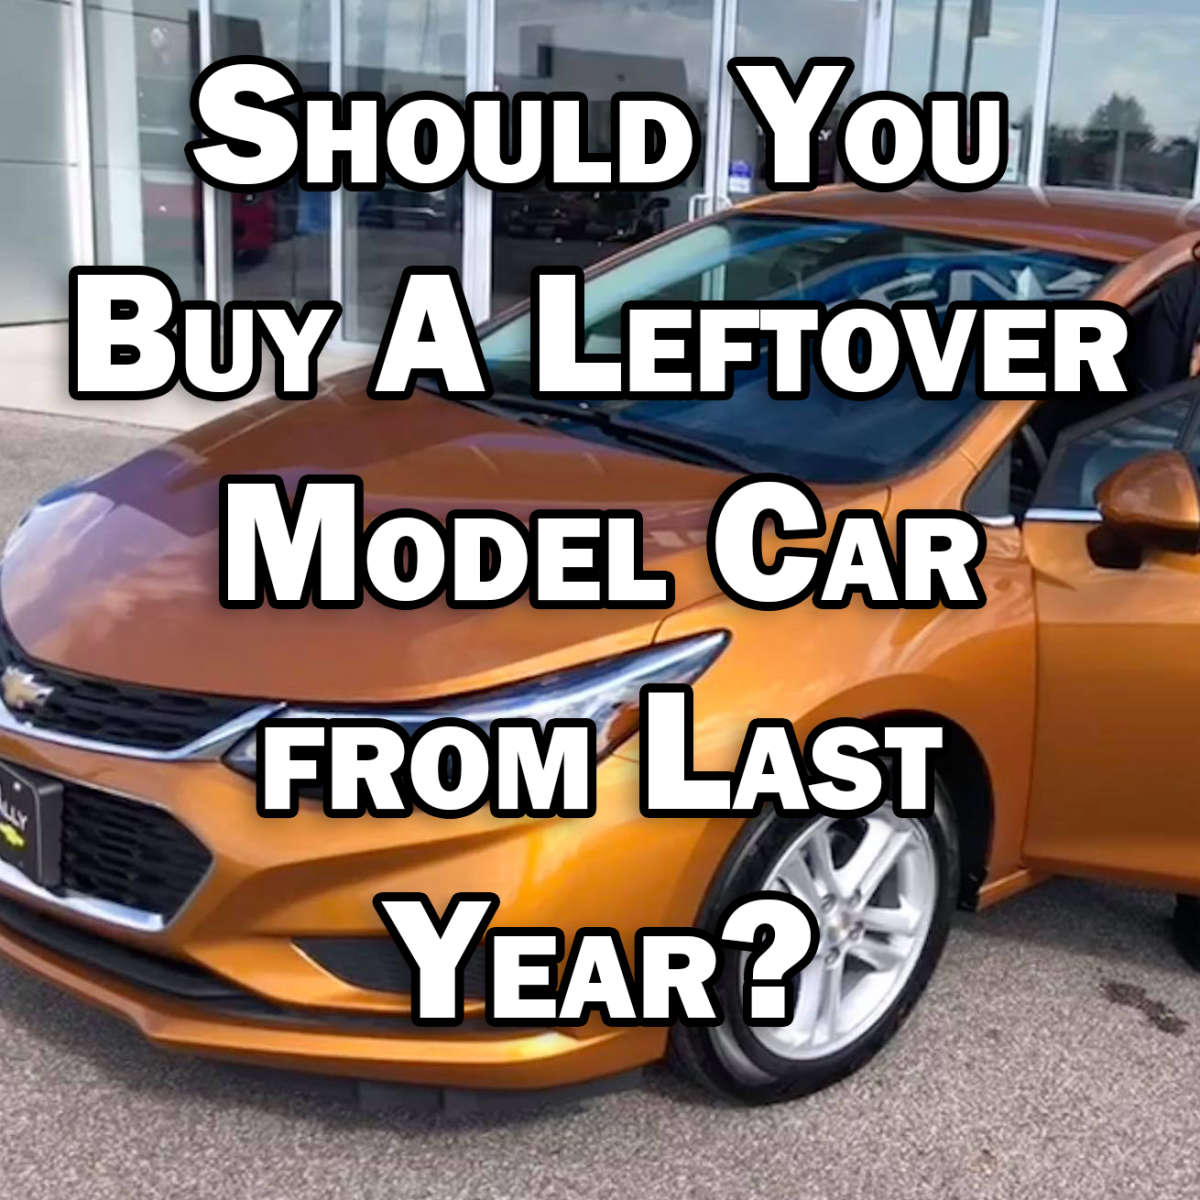 Should You Buy a Leftover Model Car From Last Year?